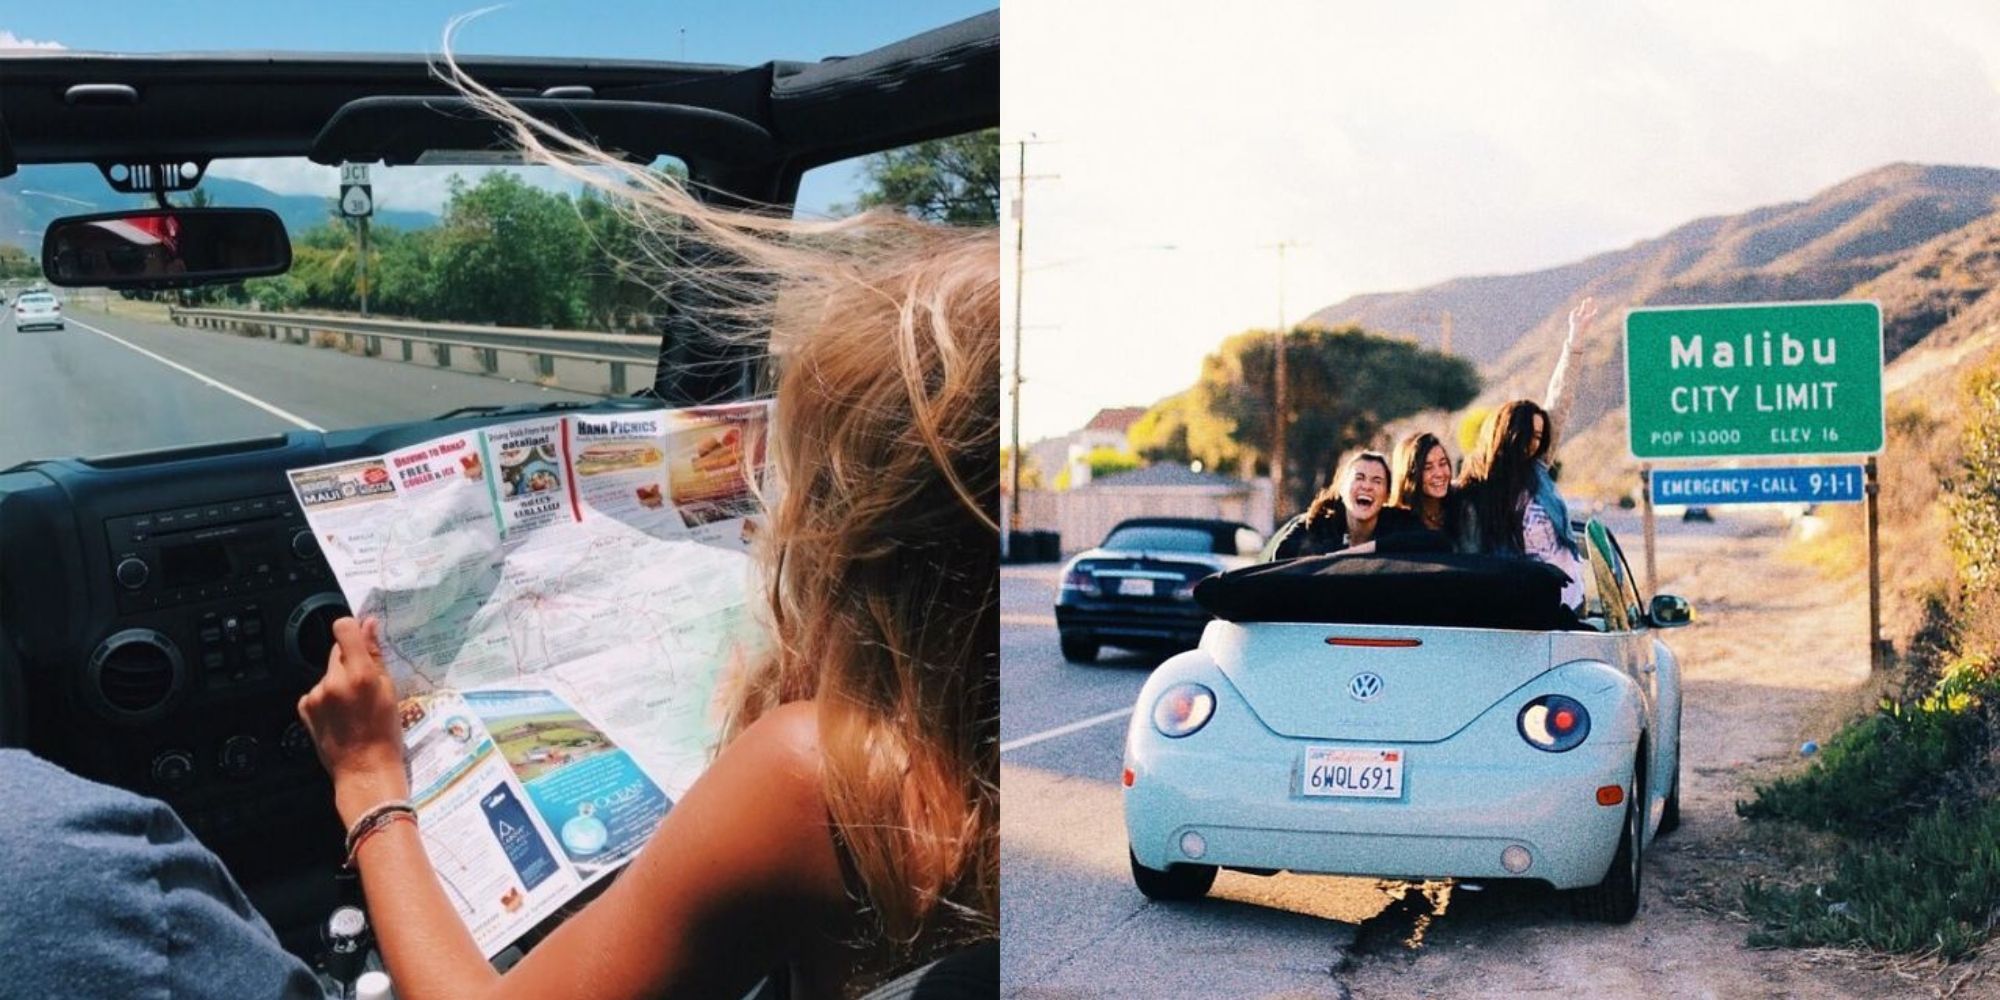 girl reading map in car and friends in car on road trip near road sign